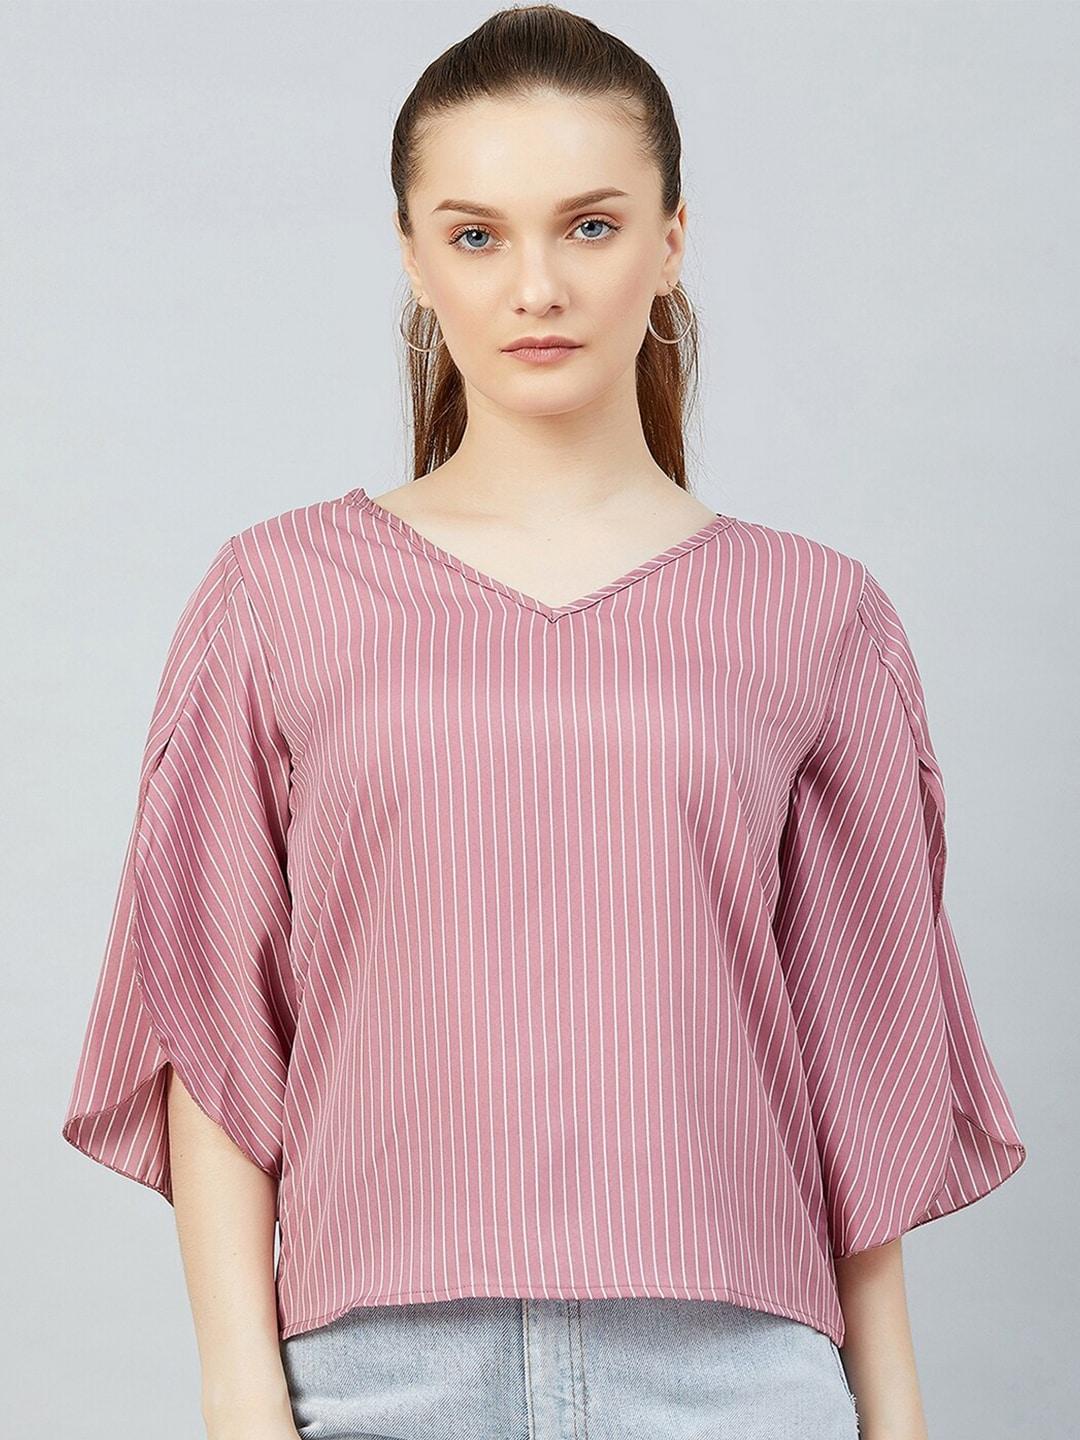 CHIMPAAANZEE Pink & White Striped Top